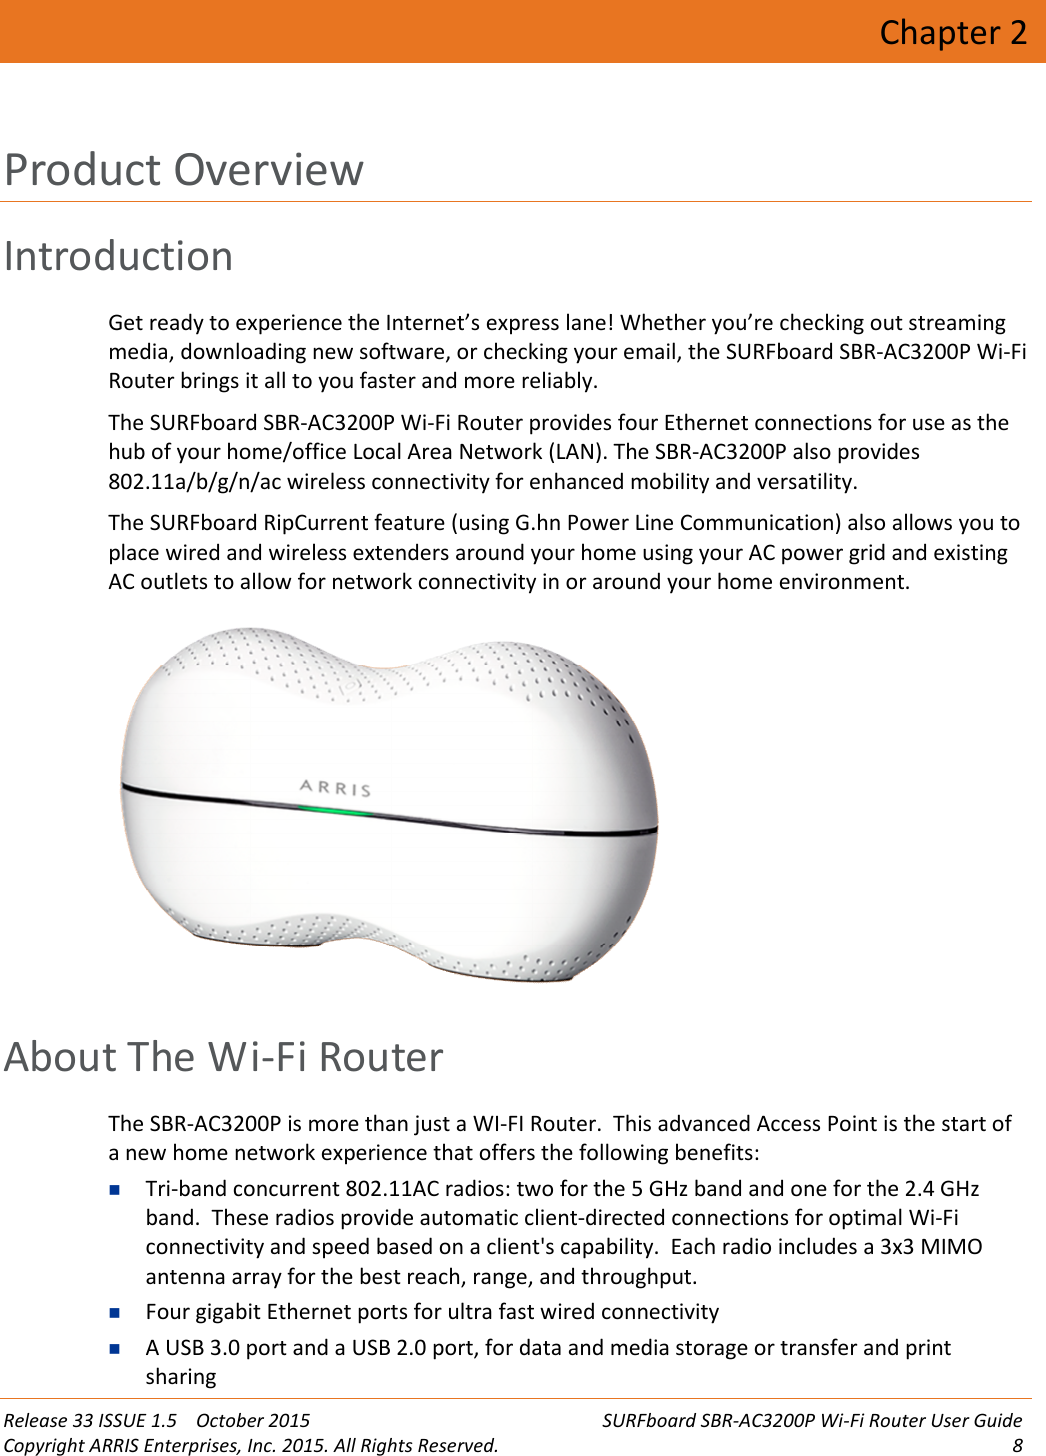 Release 33 ISSUE 1.5 October 2015 SURFboard SBR-AC3200P Wi-Fi Router User GuideCopyright ARRIS Enterprises, Inc. 2015. All Rights Reserved. 8Chapter 2Product OverviewIntroductionGet ready to experience the Internet’s express lane! Whether you’re checking out streamingmedia, downloading new software, or checking your email, the SURFboard SBR-AC3200P Wi-FiRouter brings it all to you faster and more reliably.The SURFboard SBR-AC3200P Wi-Fi Router provides four Ethernet connections for use as thehub of your home/office Local Area Network (LAN). The SBR-AC3200P also provides802.11a/b/g/n/ac wireless connectivity for enhanced mobility and versatility.The SURFboard RipCurrent feature (using G.hn Power Line Communication) also allows you toplace wired and wireless extenders around your home using your AC power grid and existingAC outlets to allow for network connectivity in or around your home environment.About The Wi-Fi RouterThe SBR-AC3200P is more than just a WI-FI Router. This advanced Access Point is the start ofa new home network experience that offers the following benefits:Tri-band concurrent 802.11AC radios: two for the 5 GHz band and one for the 2.4 GHzband. These radios provide automatic client-directed connections for optimal Wi-Ficonnectivity and speed based on a client&apos;s capability. Each radio includes a 3x3 MIMOantenna array for the best reach, range, and throughput.Four gigabit Ethernet ports for ultra fast wired connectivityA USB 3.0 port and a USB 2.0 port, for data and media storage or transfer and printsharing